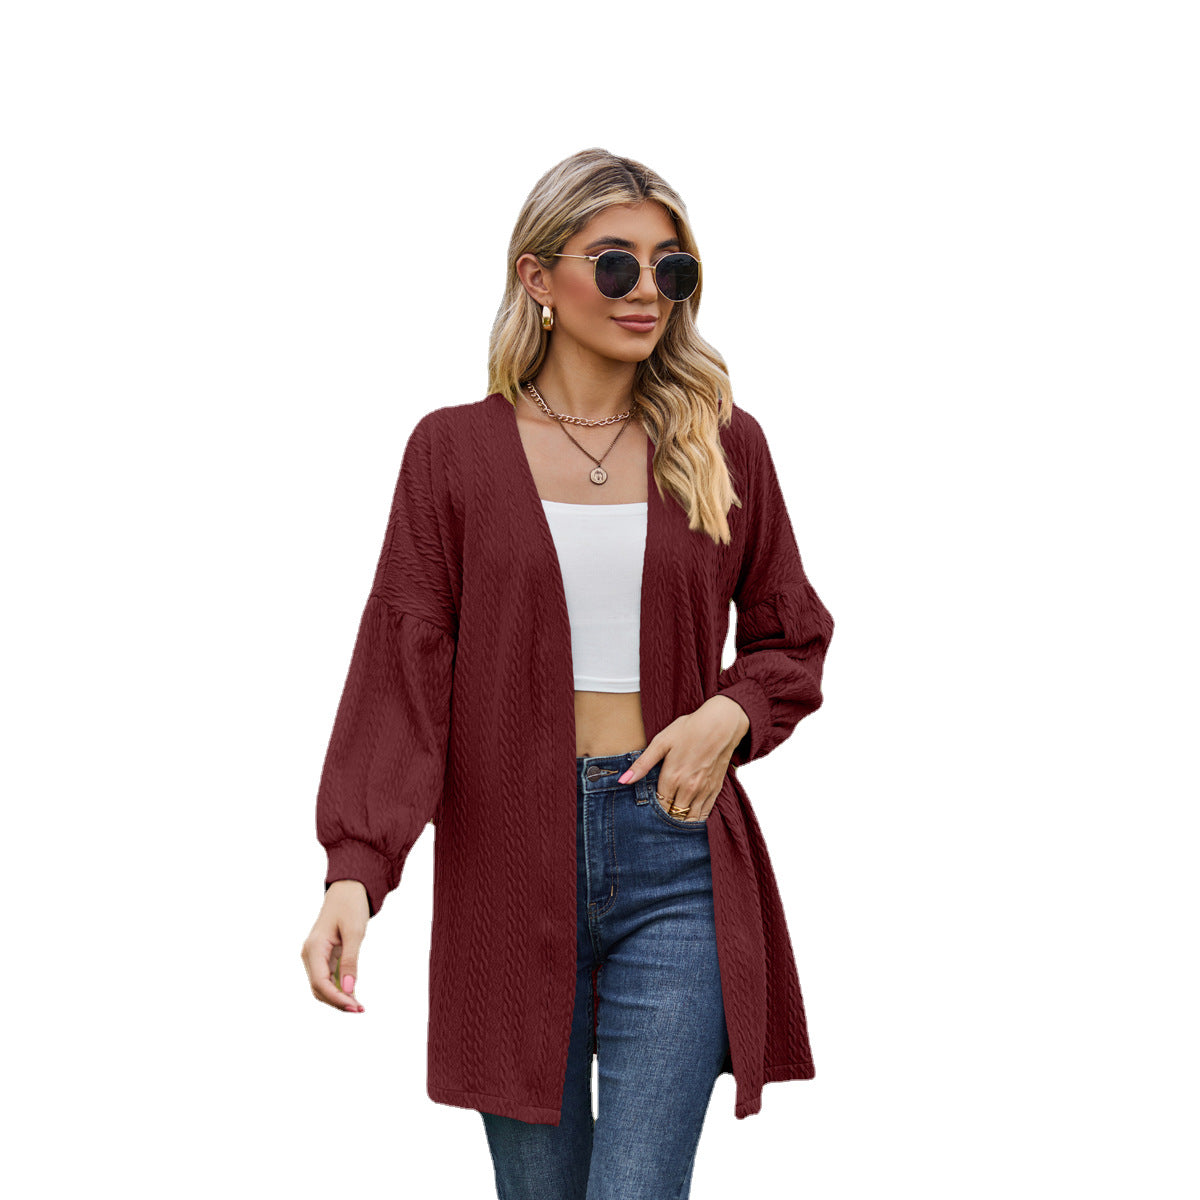 Women's Long Sleeve Solid Color Loose Knitting Cardigans